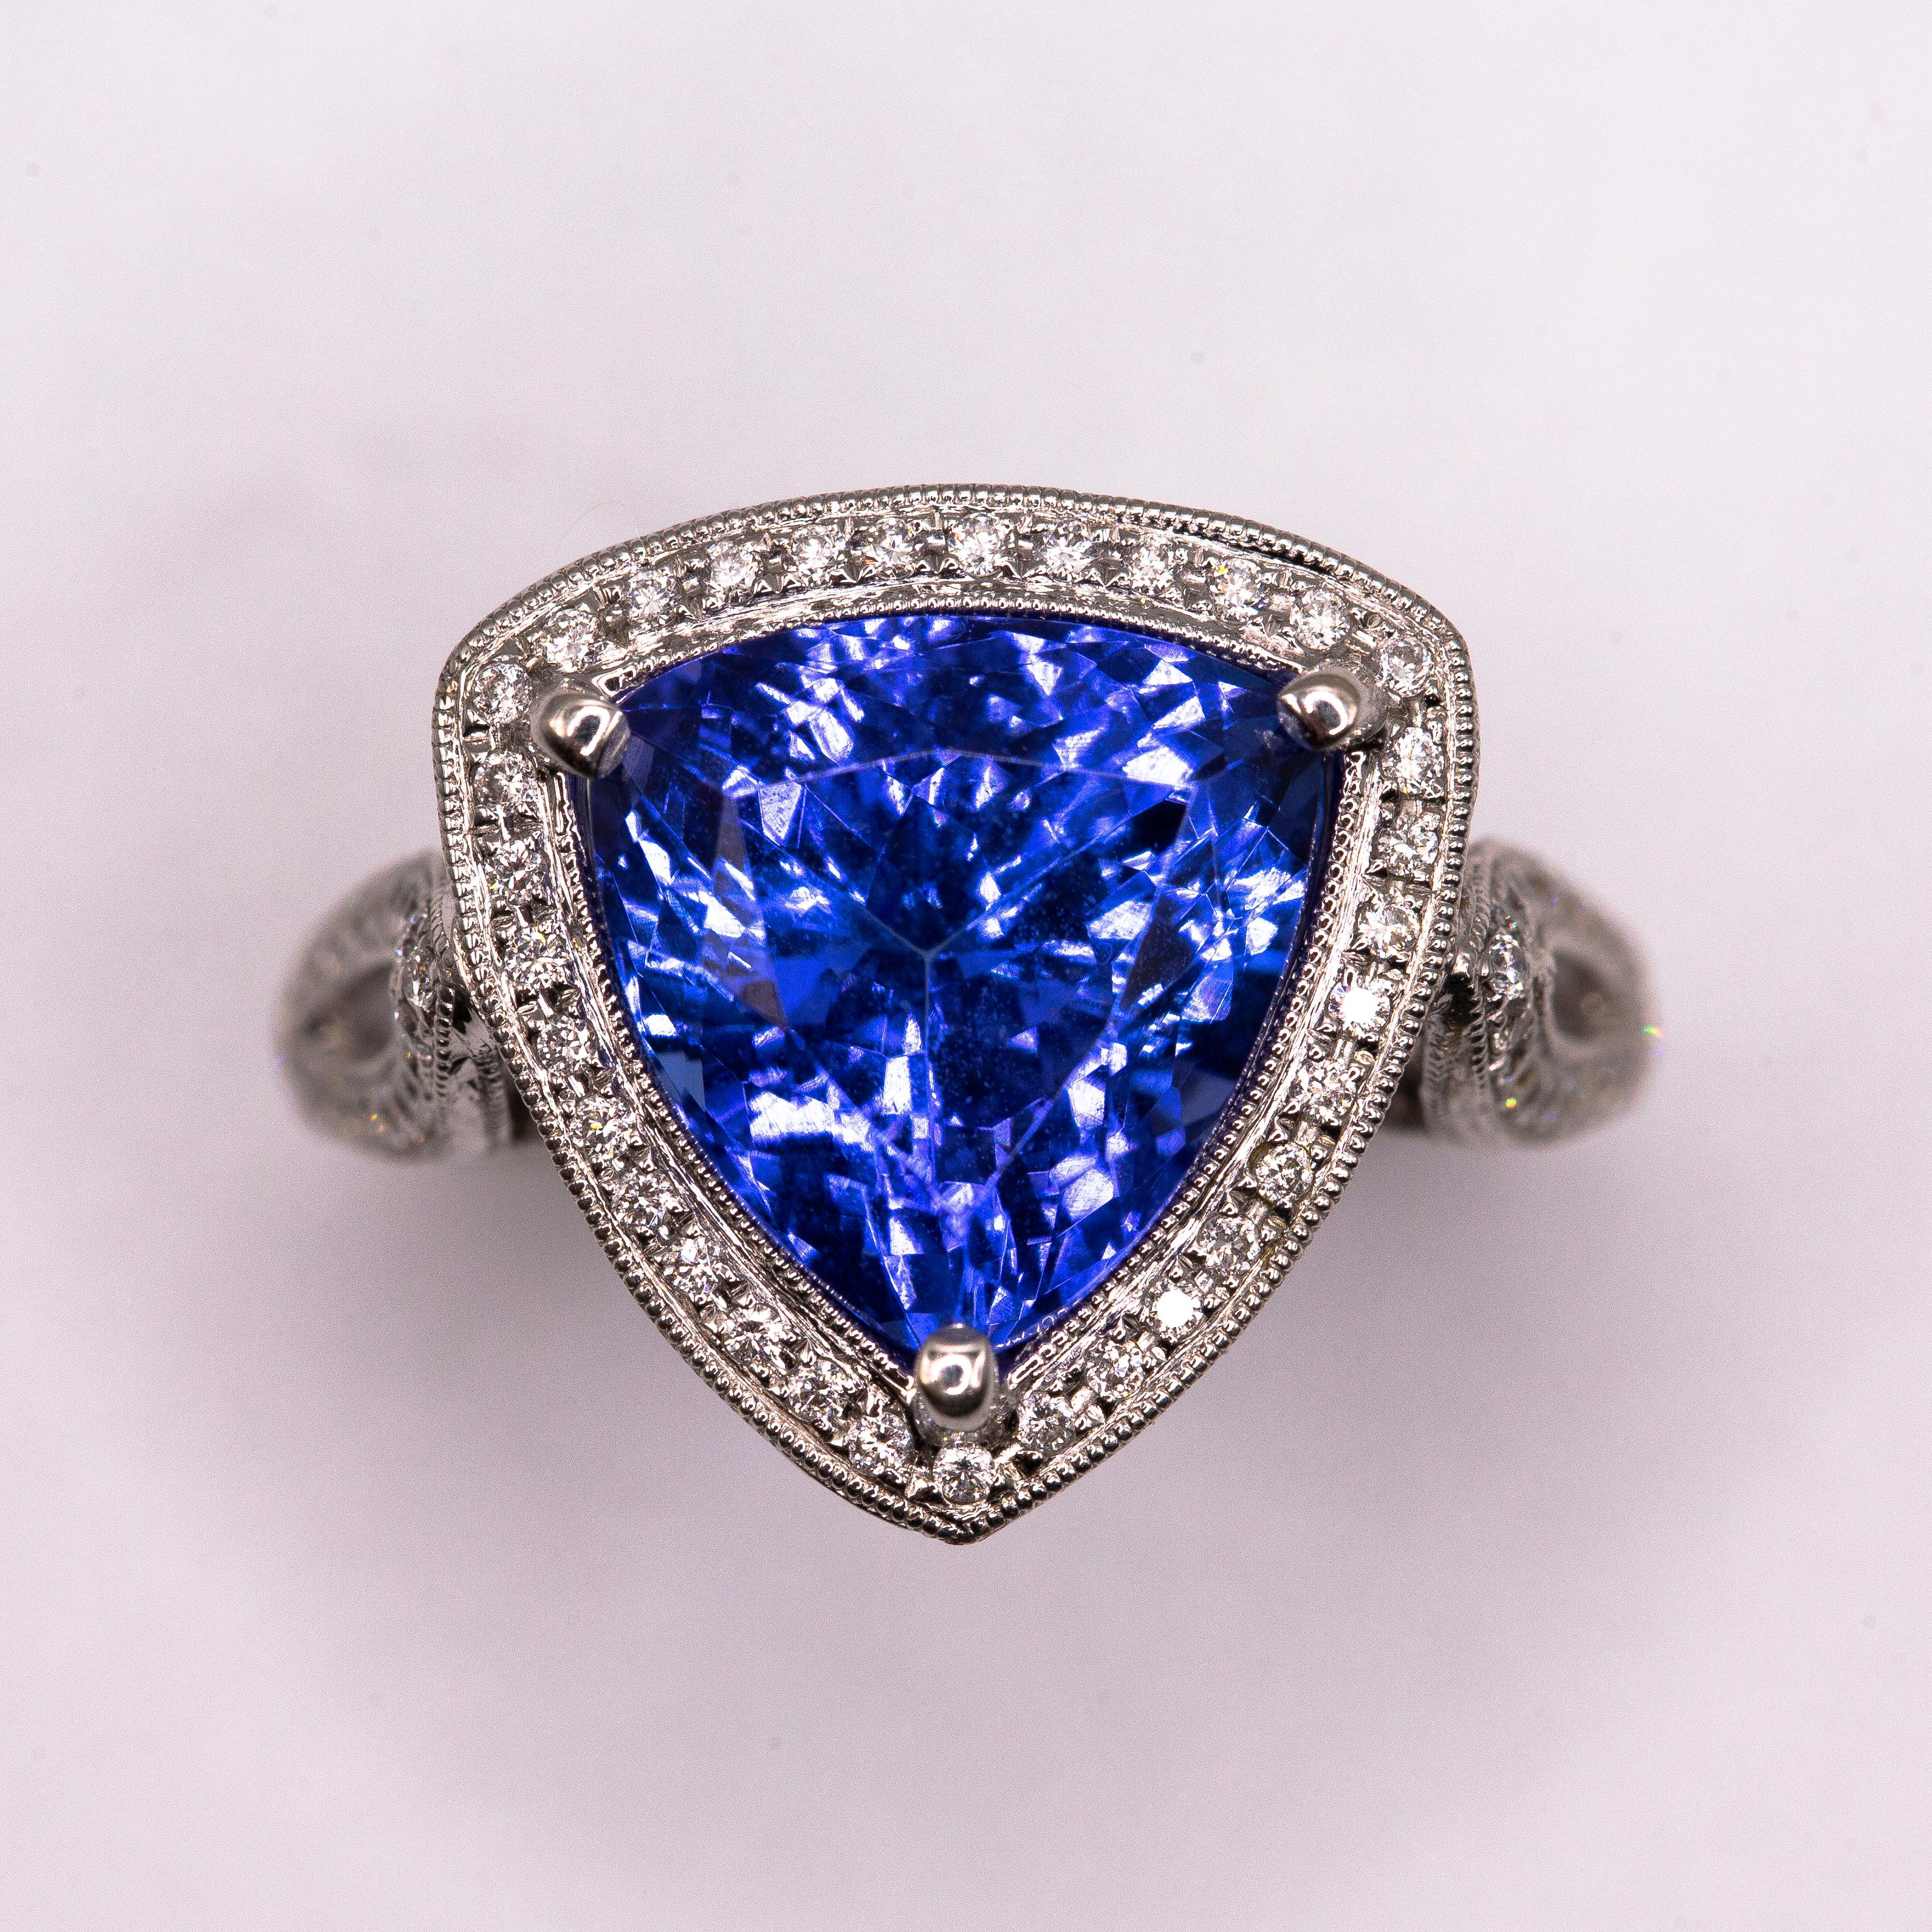 An spectacular, highly transparent and intense near flawless trillion-cut 6.13 carat Tanzanite was inspiration for this one- of- a kind hand crafted ring in 18k white gold. Owing to its expert cut and proportion, the center gem provides perfect